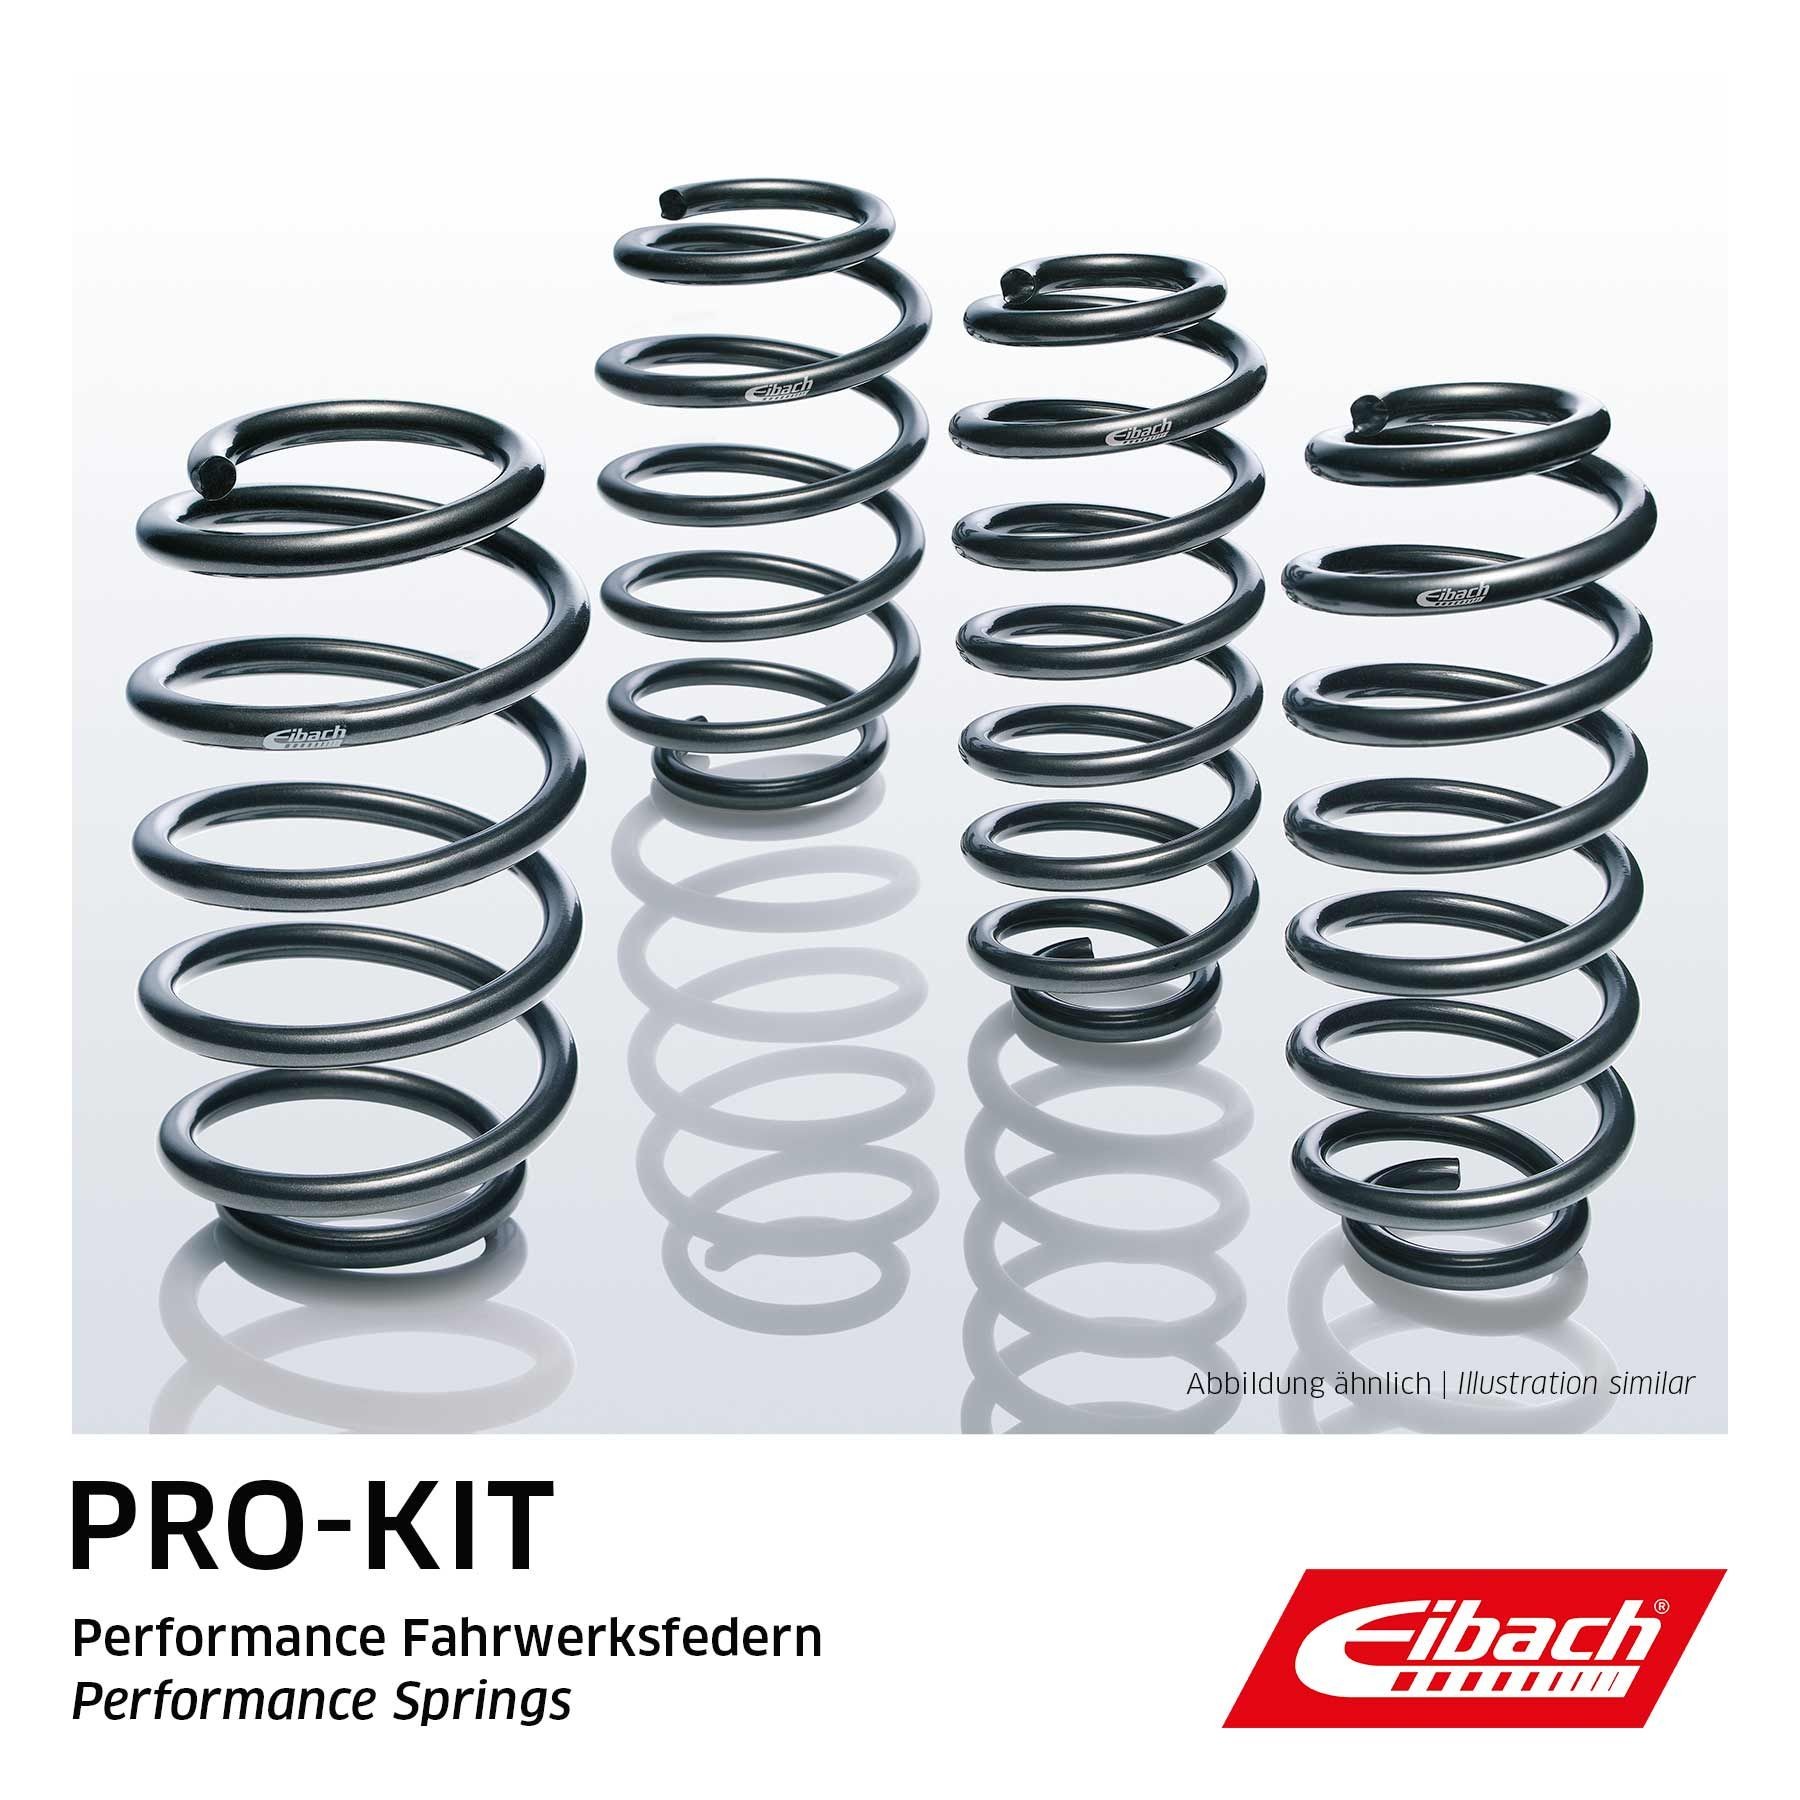 Volkswagen Suspension kit, coil springs EIBACH E10-15-021-04-22 at a good price